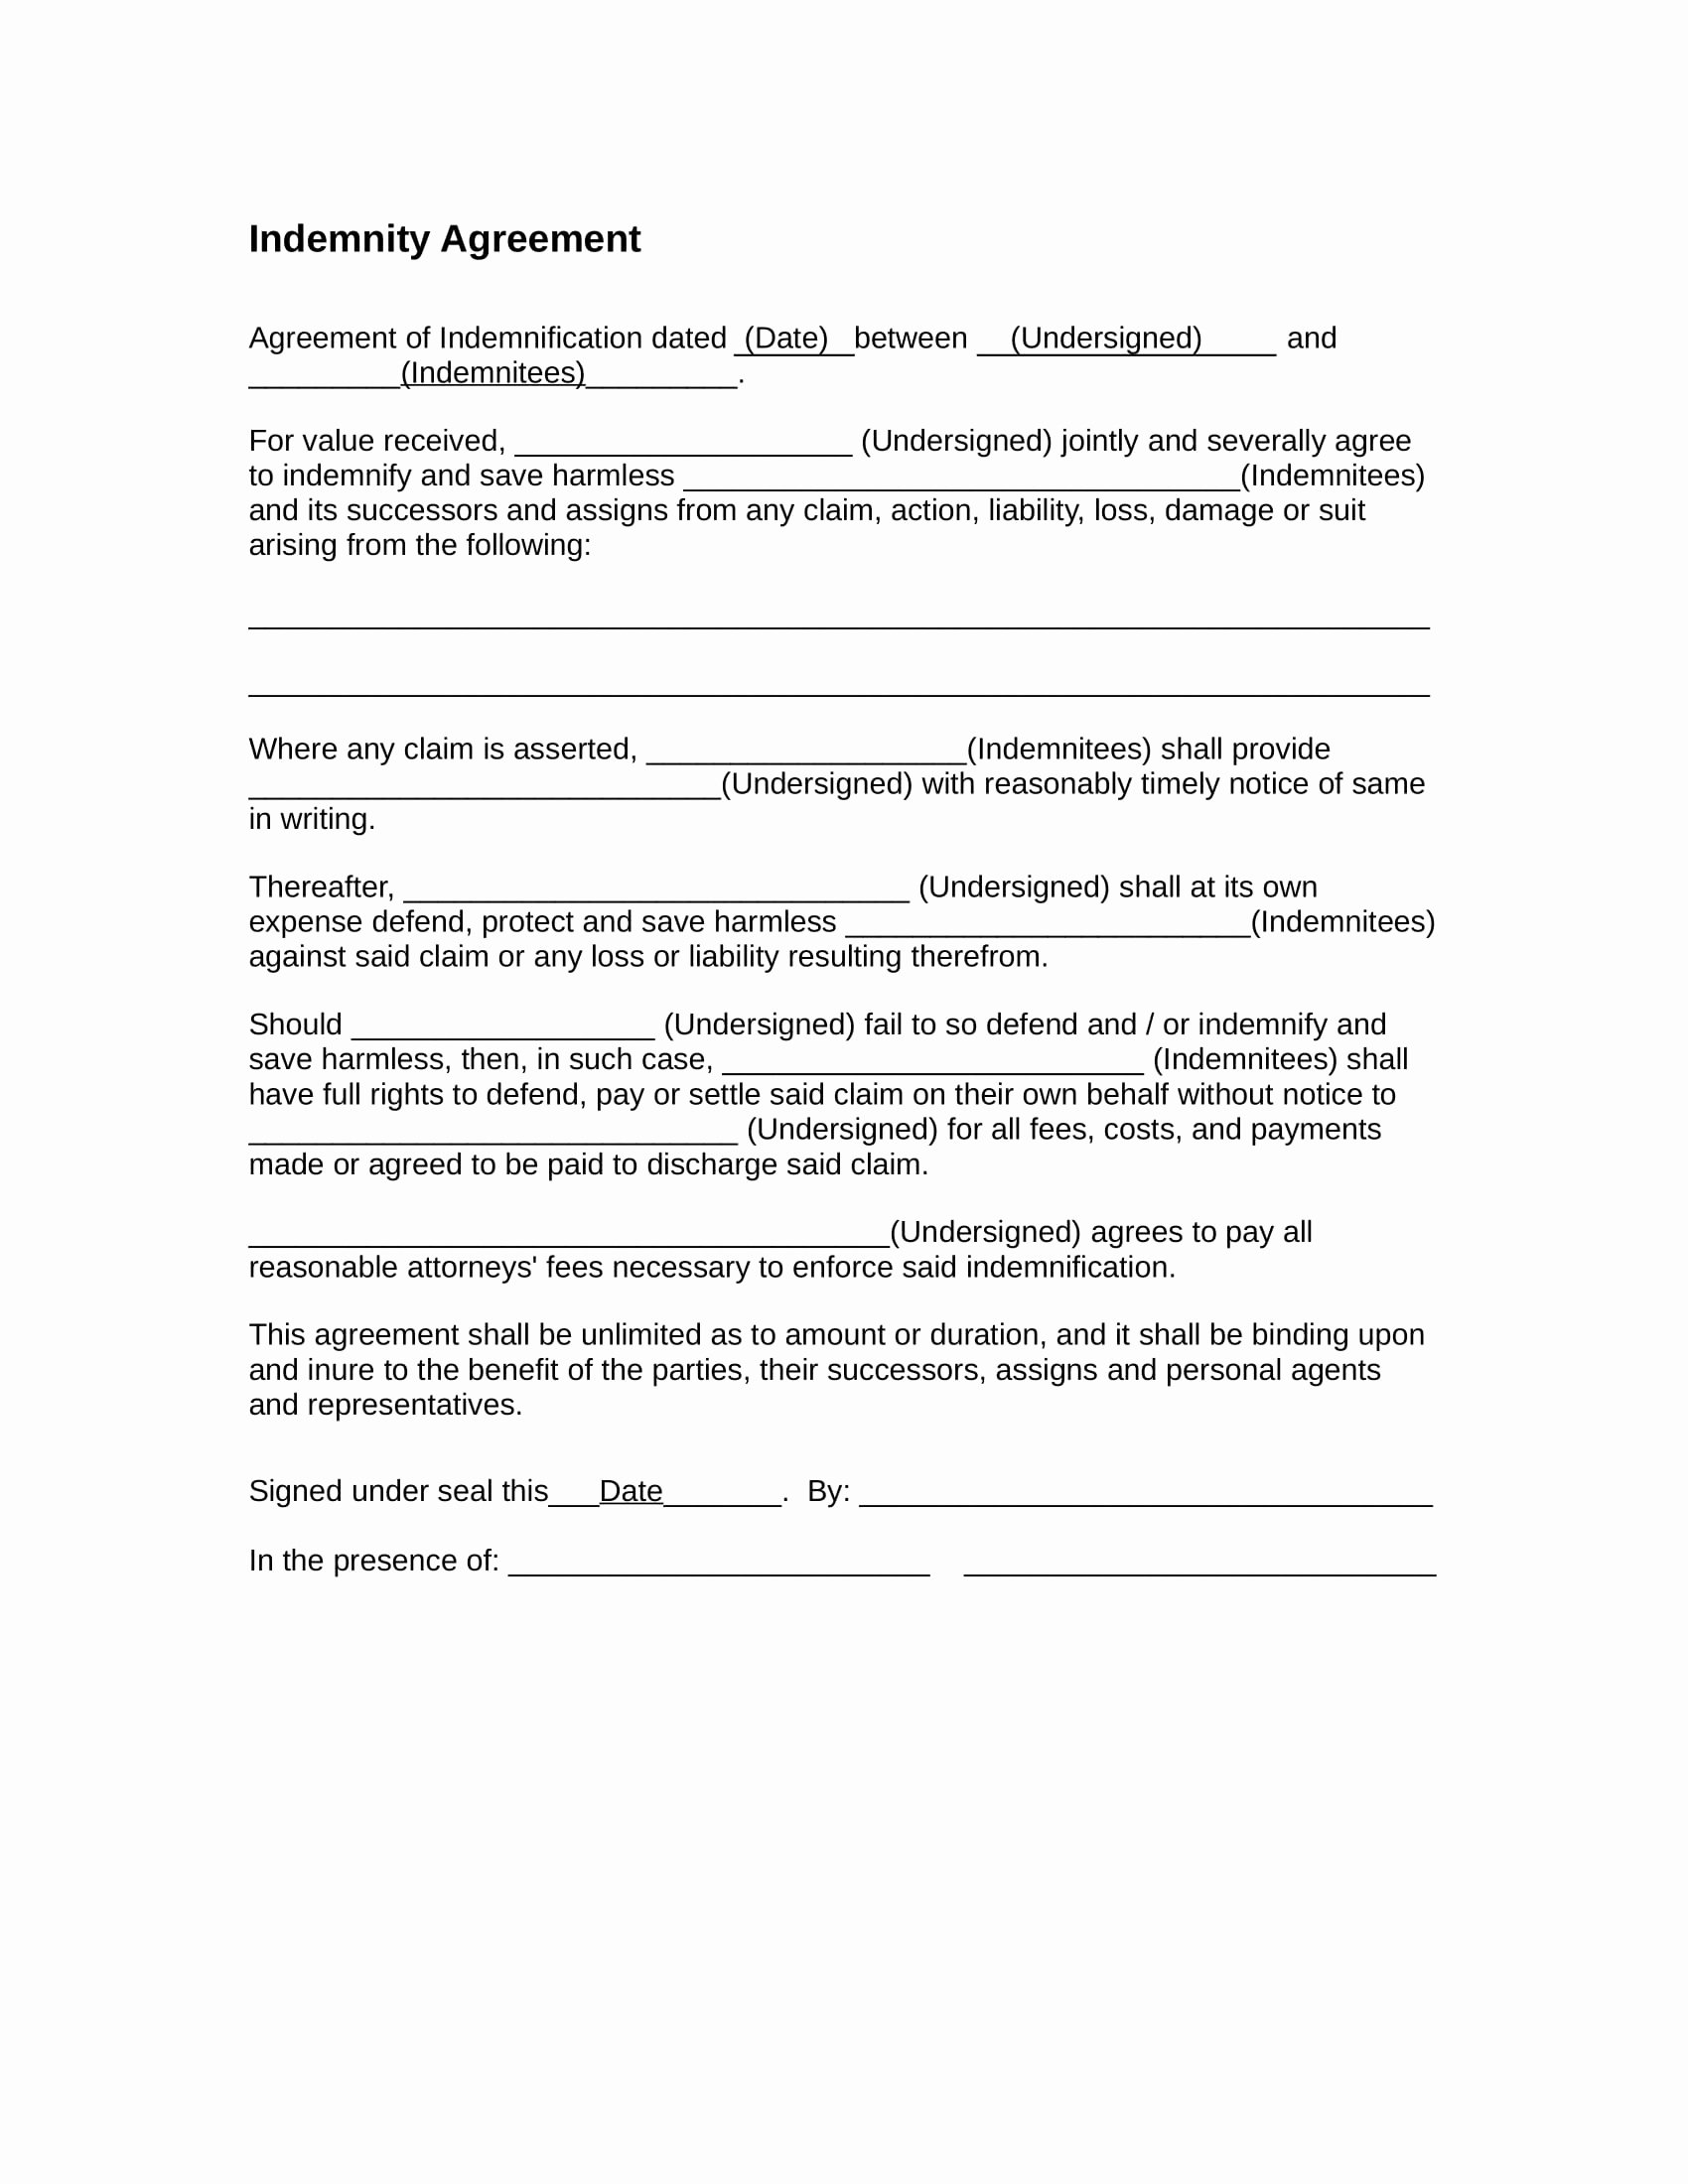 Hold Harmless Agreement Sample Wording Luxury Free 5 Indemnity Agreement Contract forms In Pdf